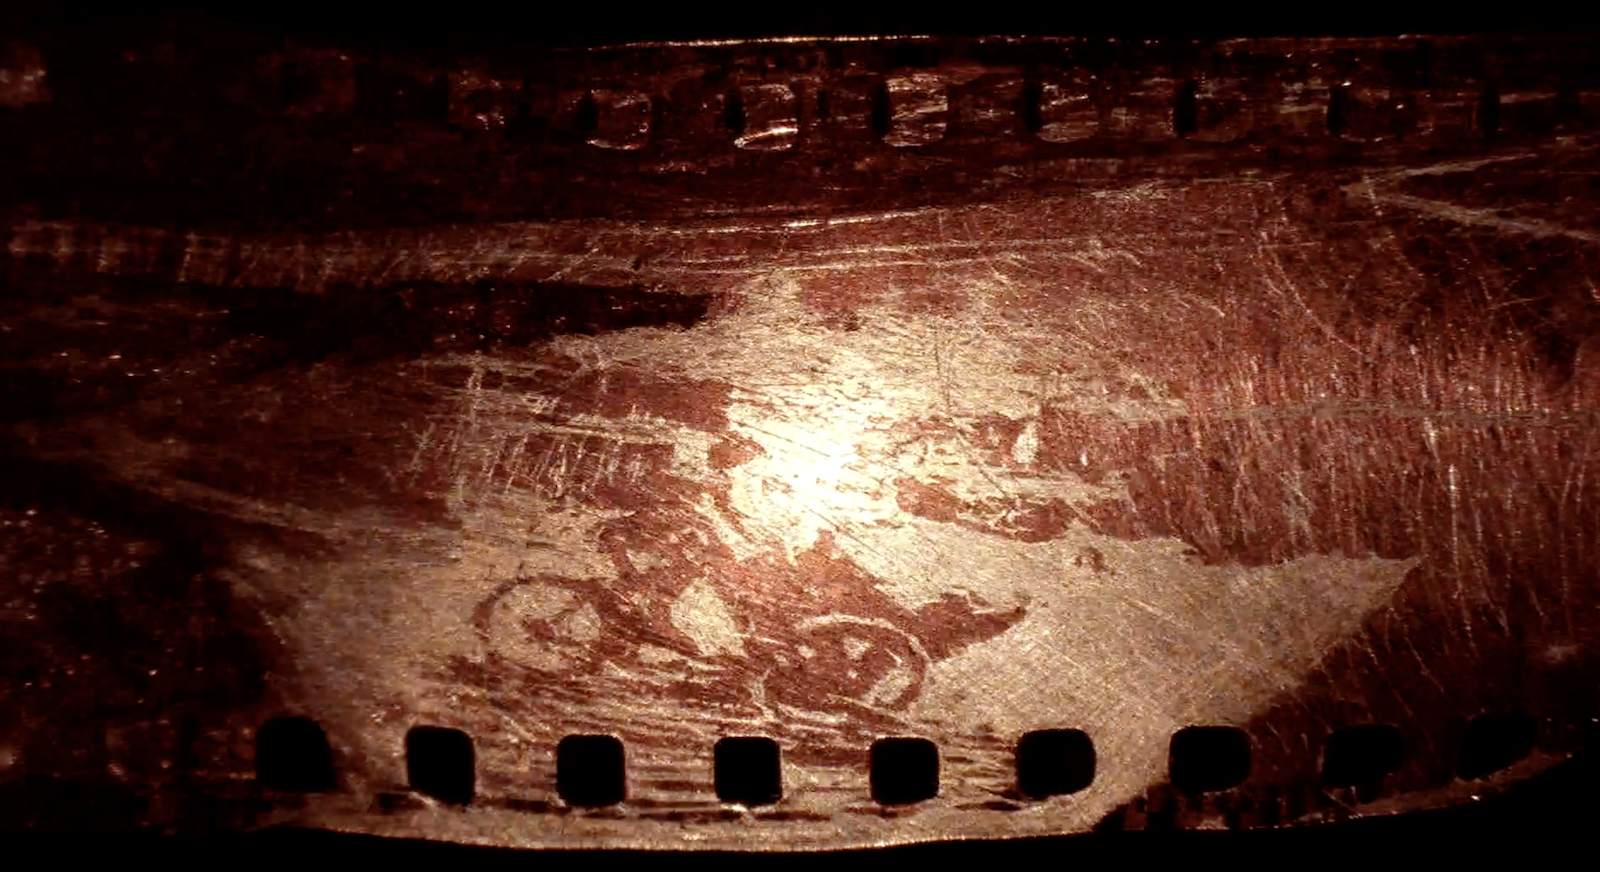 A degraded film strip with a bicycle visible on it.